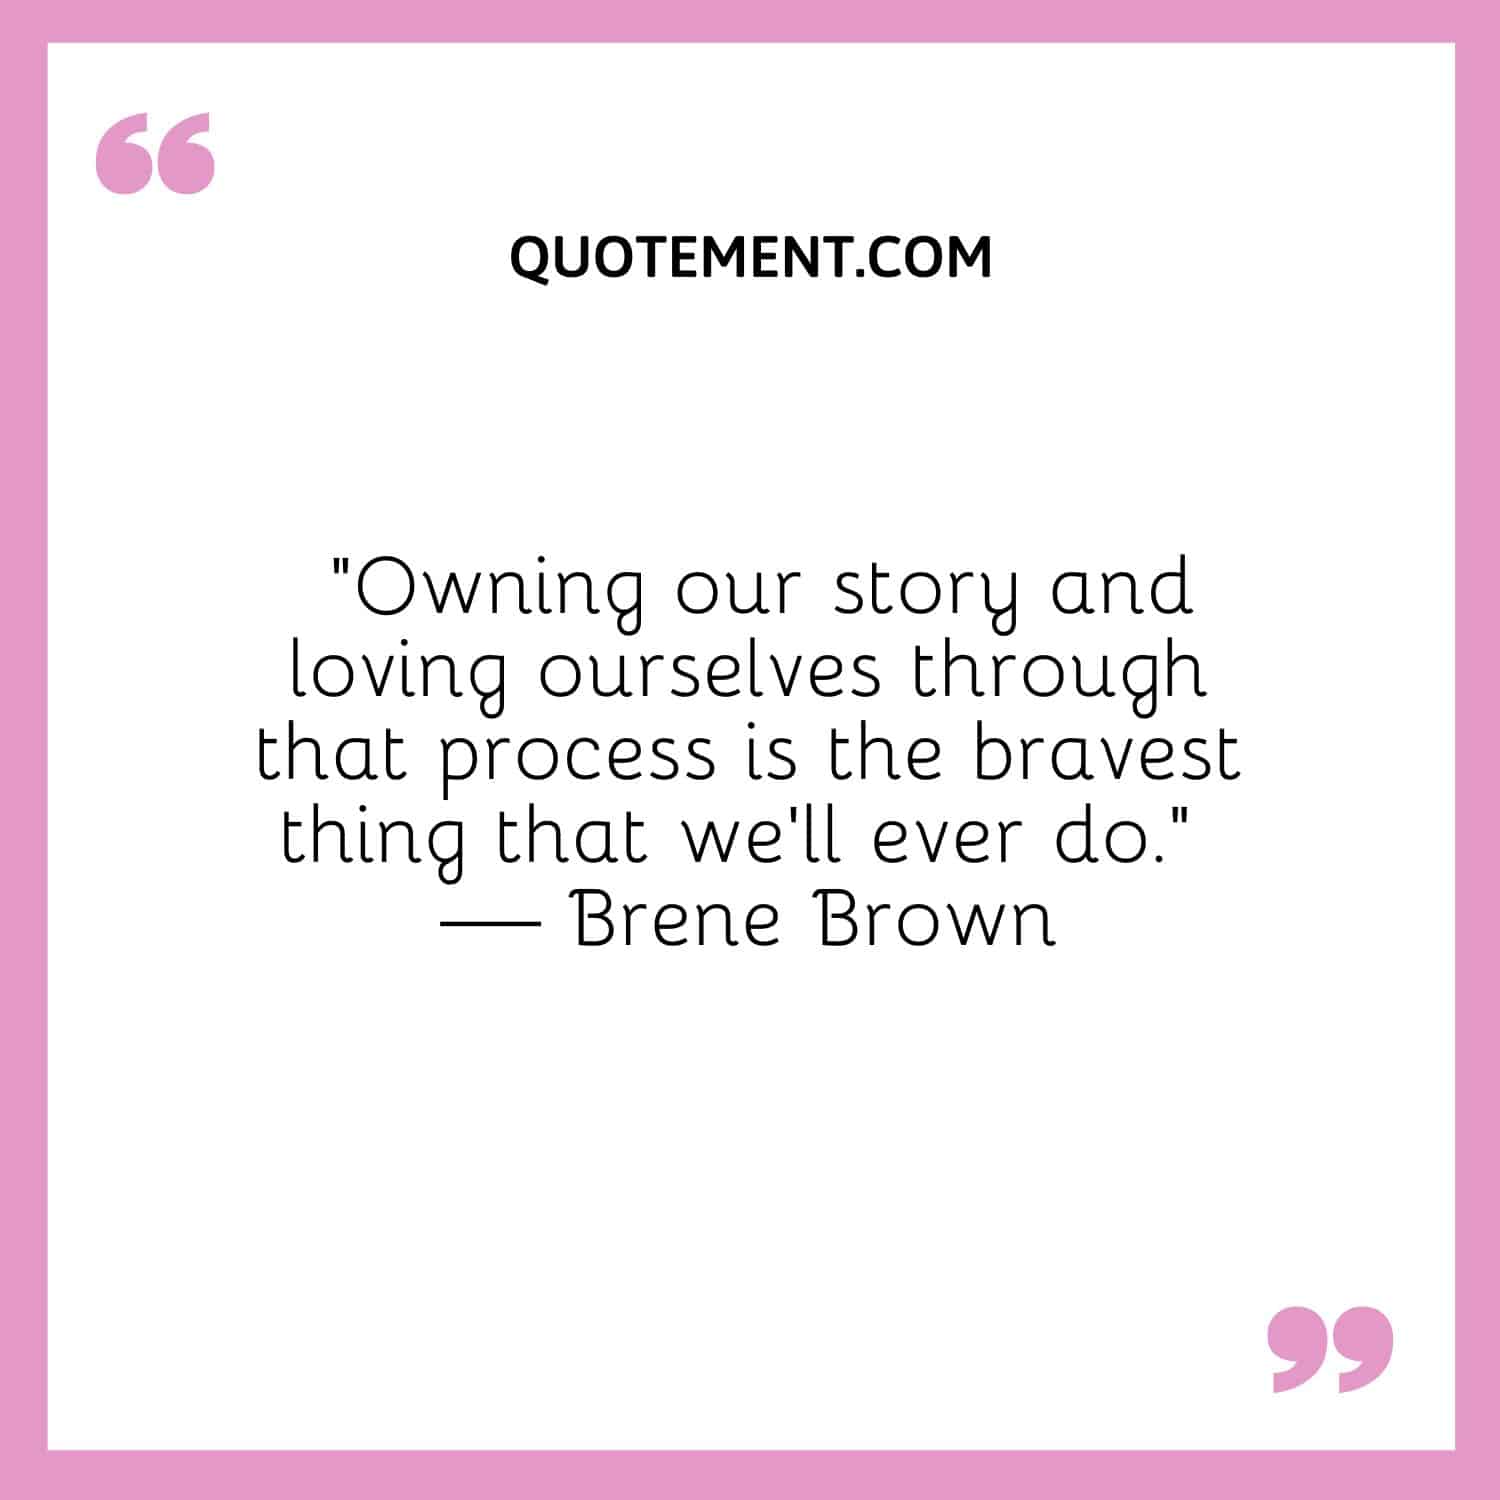 Owning our story and loving ourselves through that process is the bravest thing that we’ll ever do